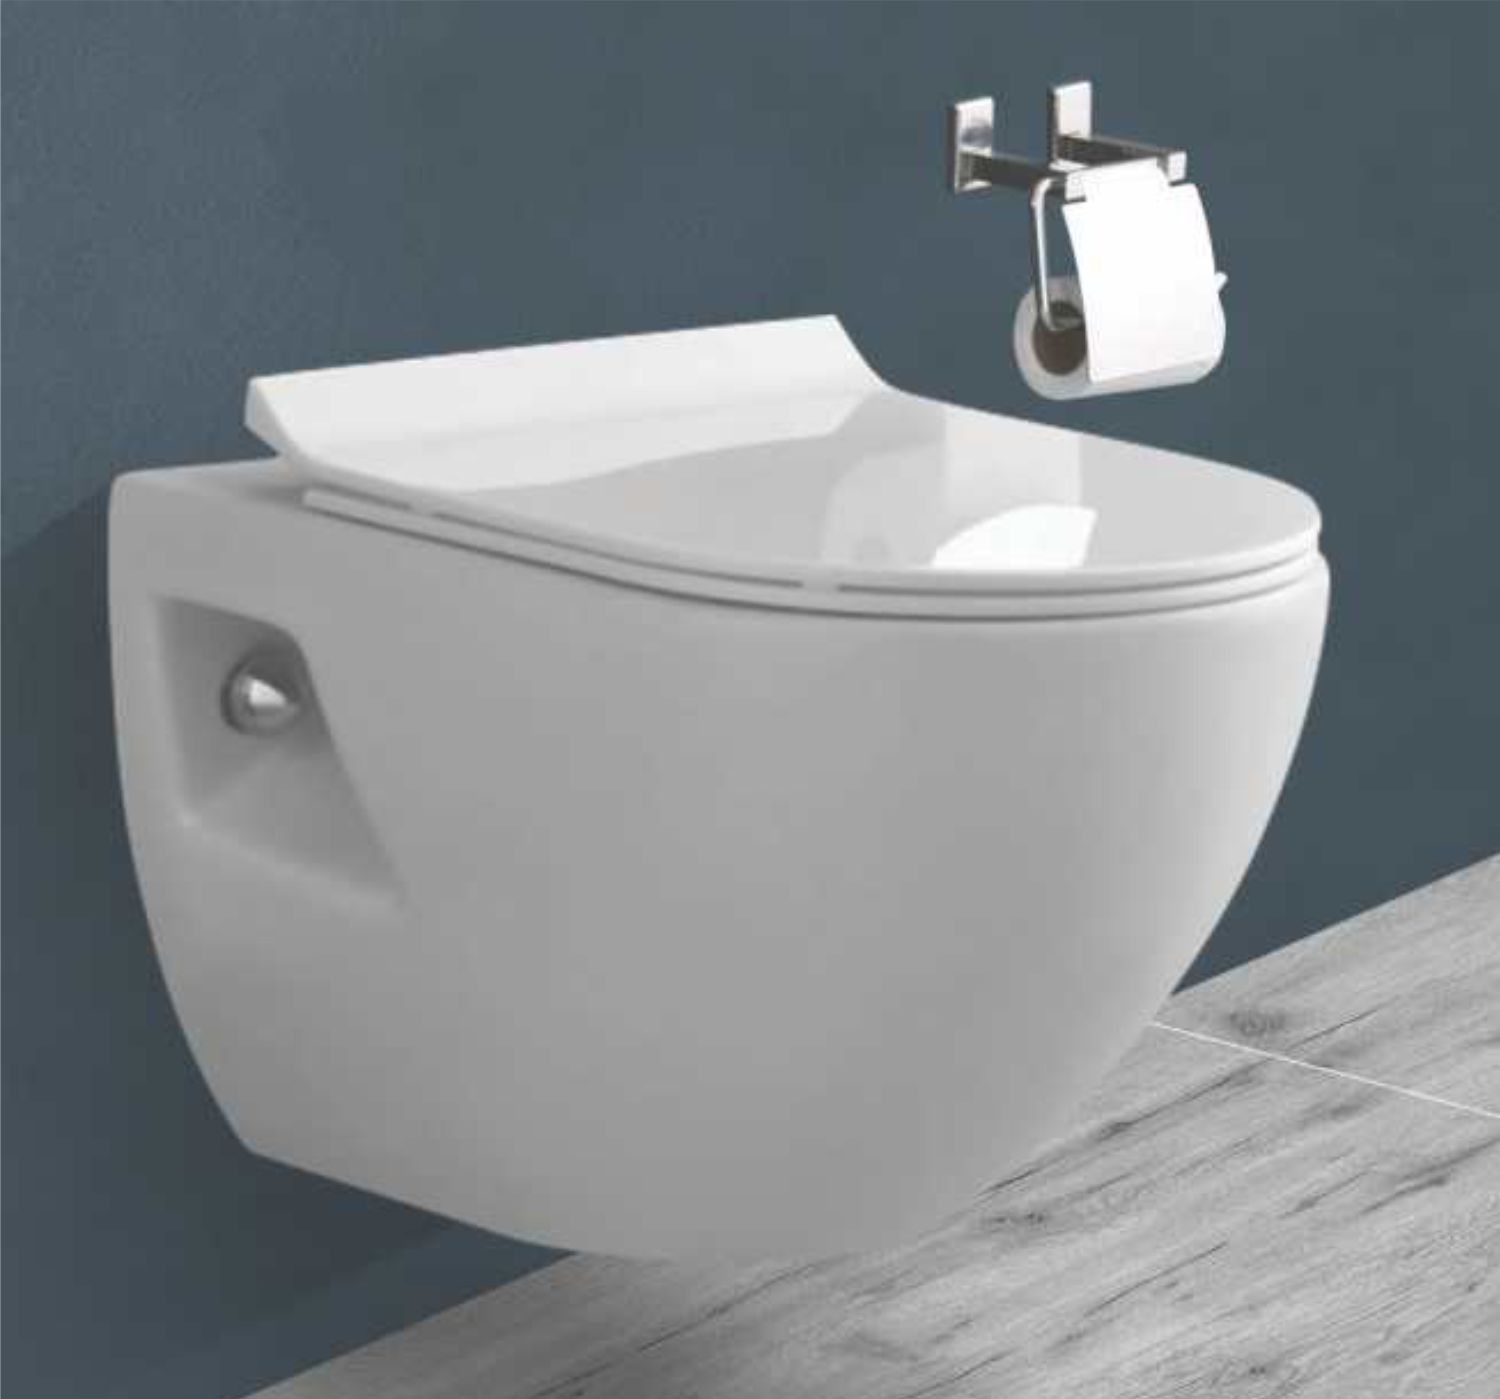 Wall Hung Water Closet Manufacturer, Exporter and Supplier